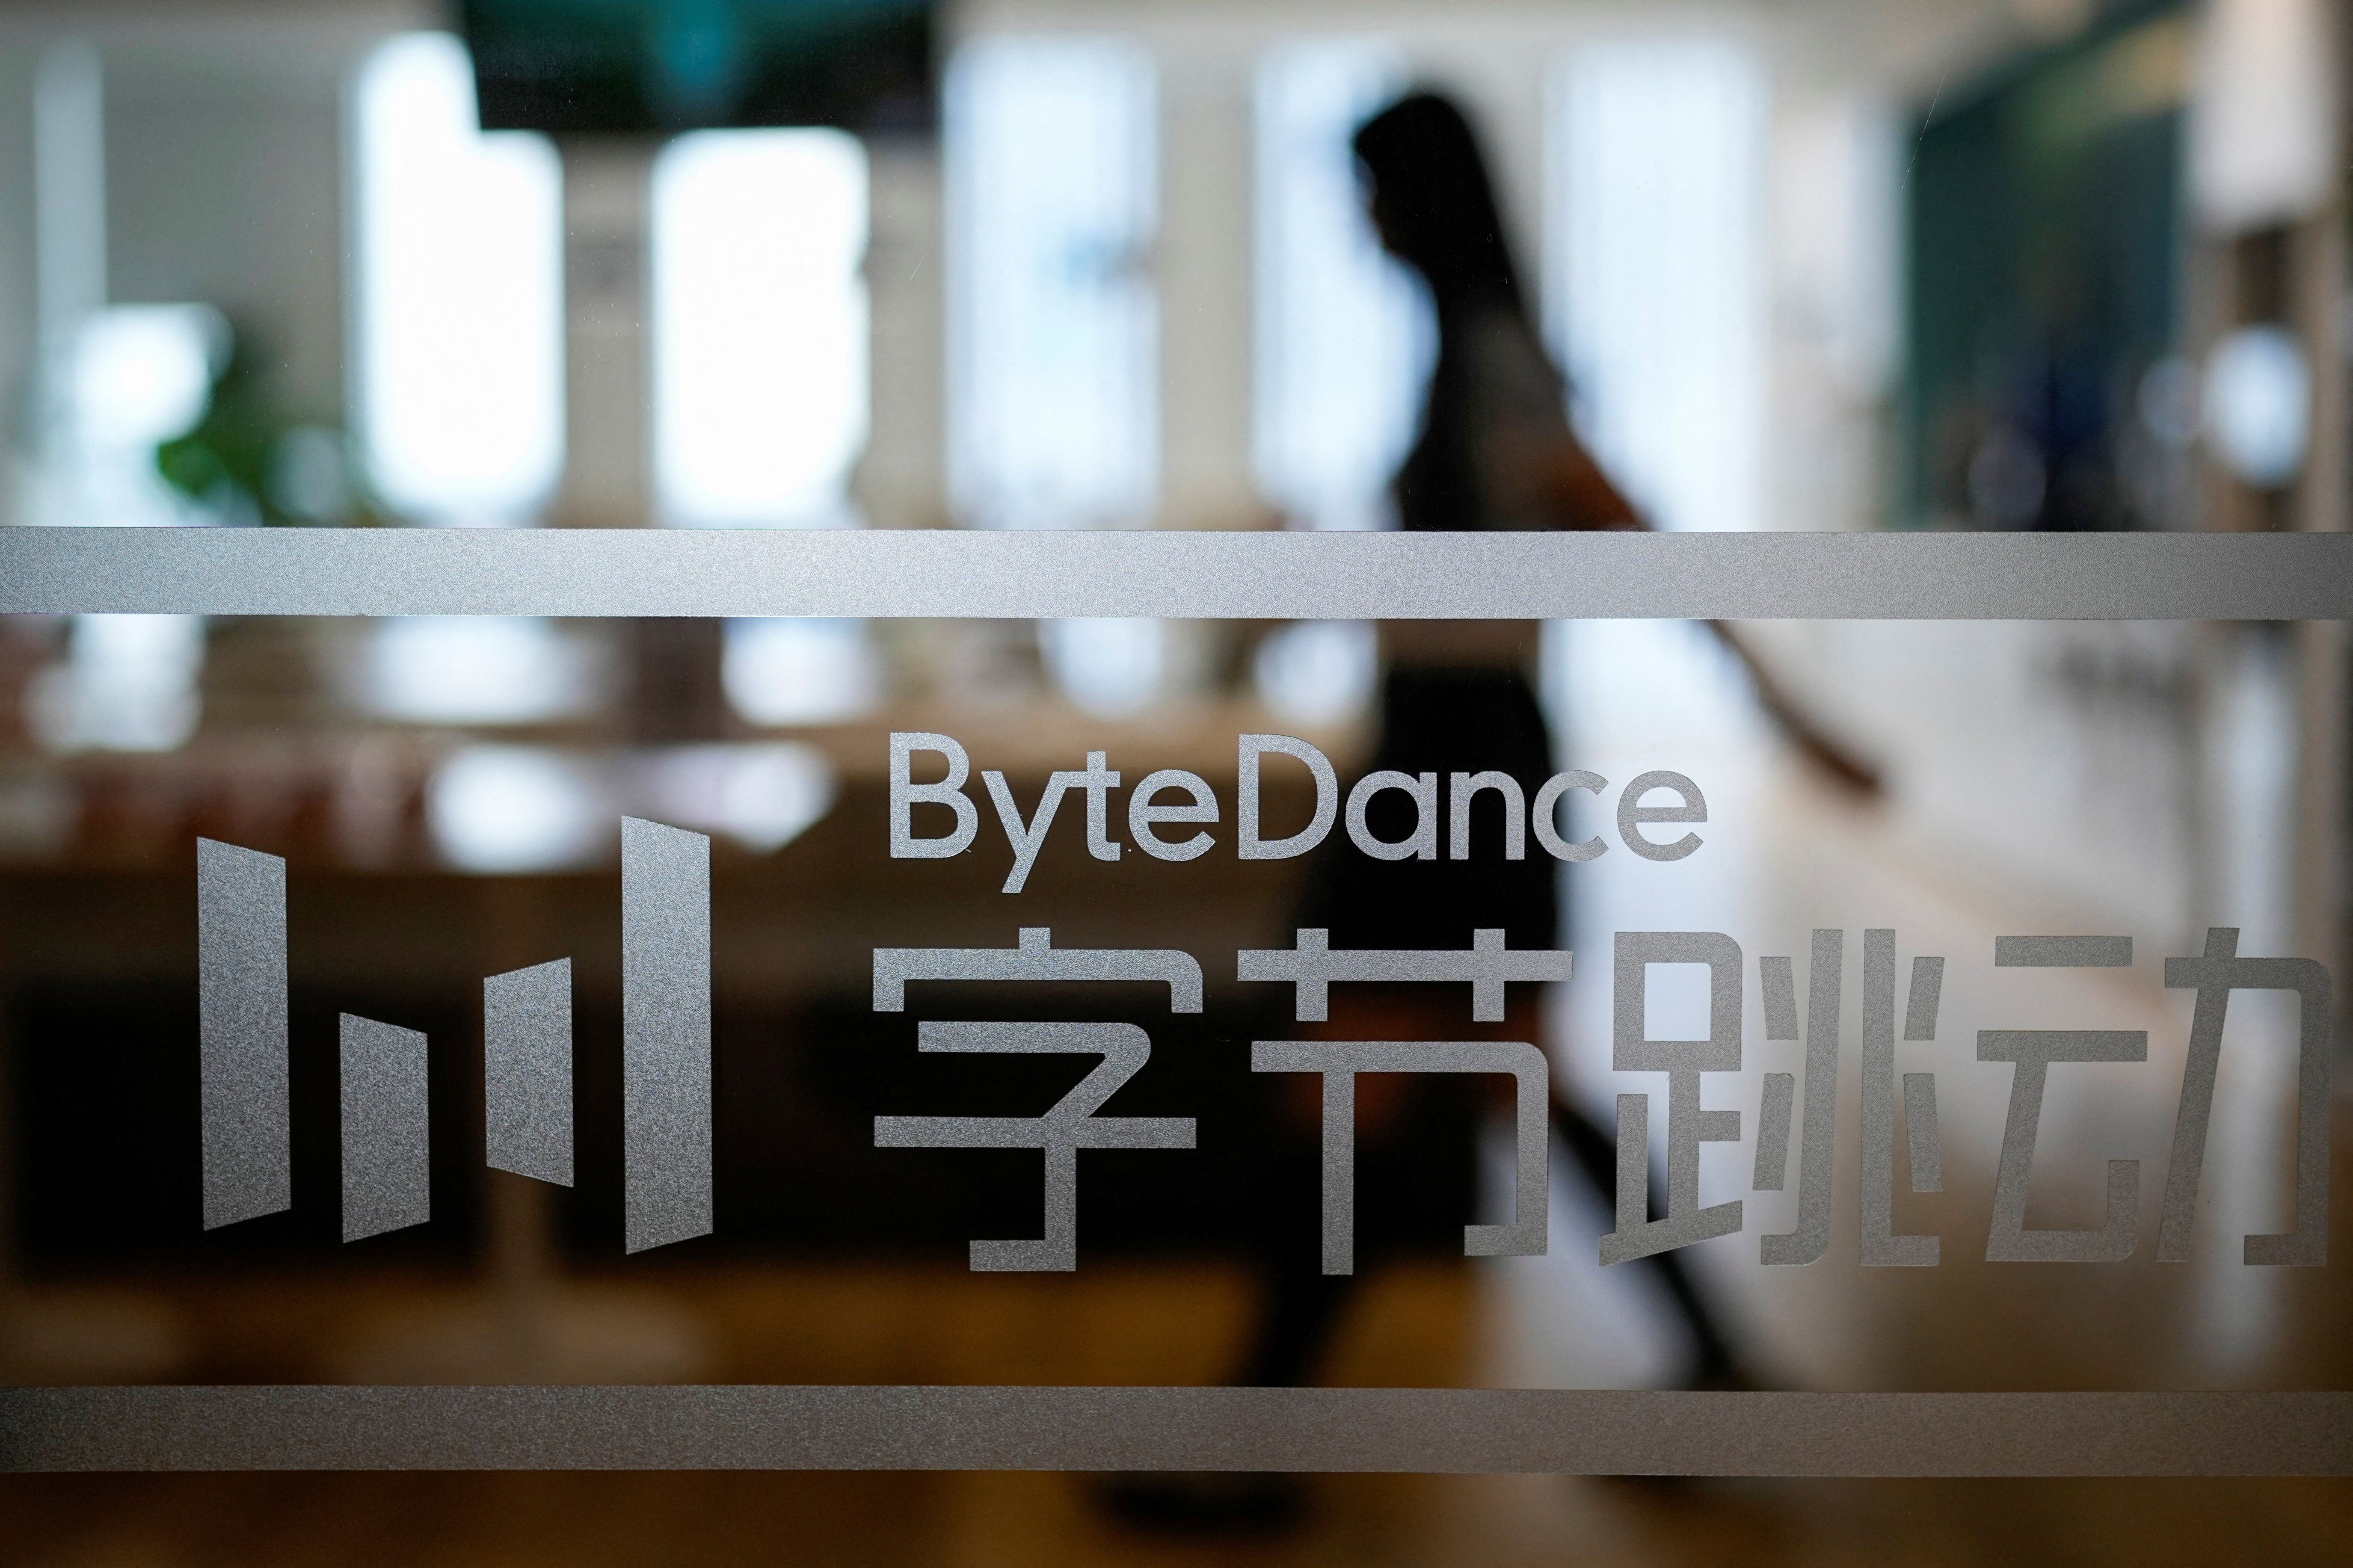 The ByteDance logo is seen at the company's office in Shanghai